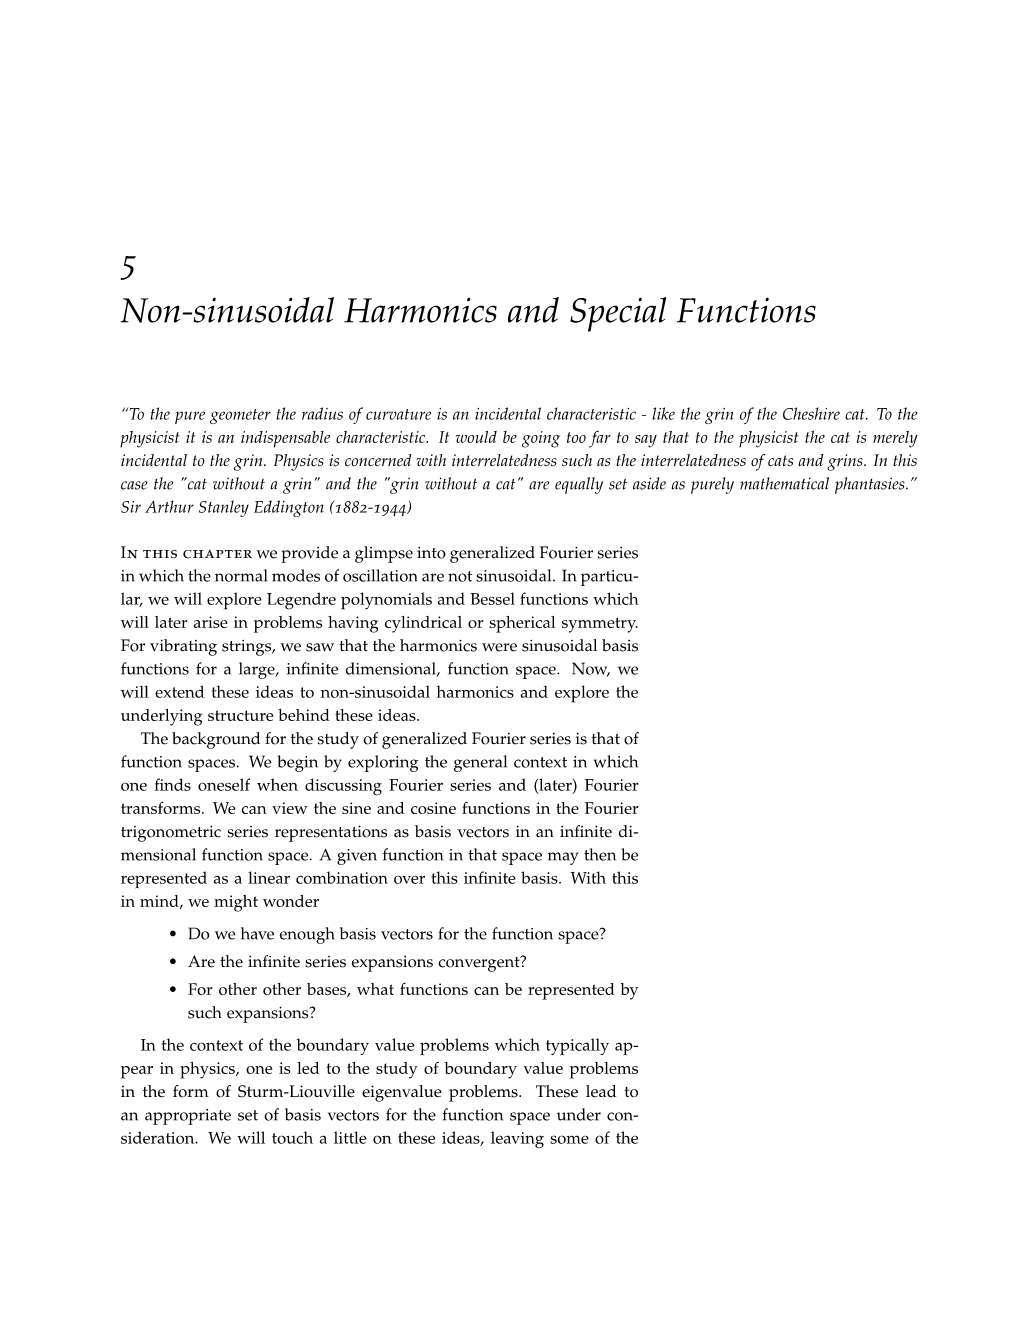 5 Non-Sinusoidal Harmonics and Special Functions